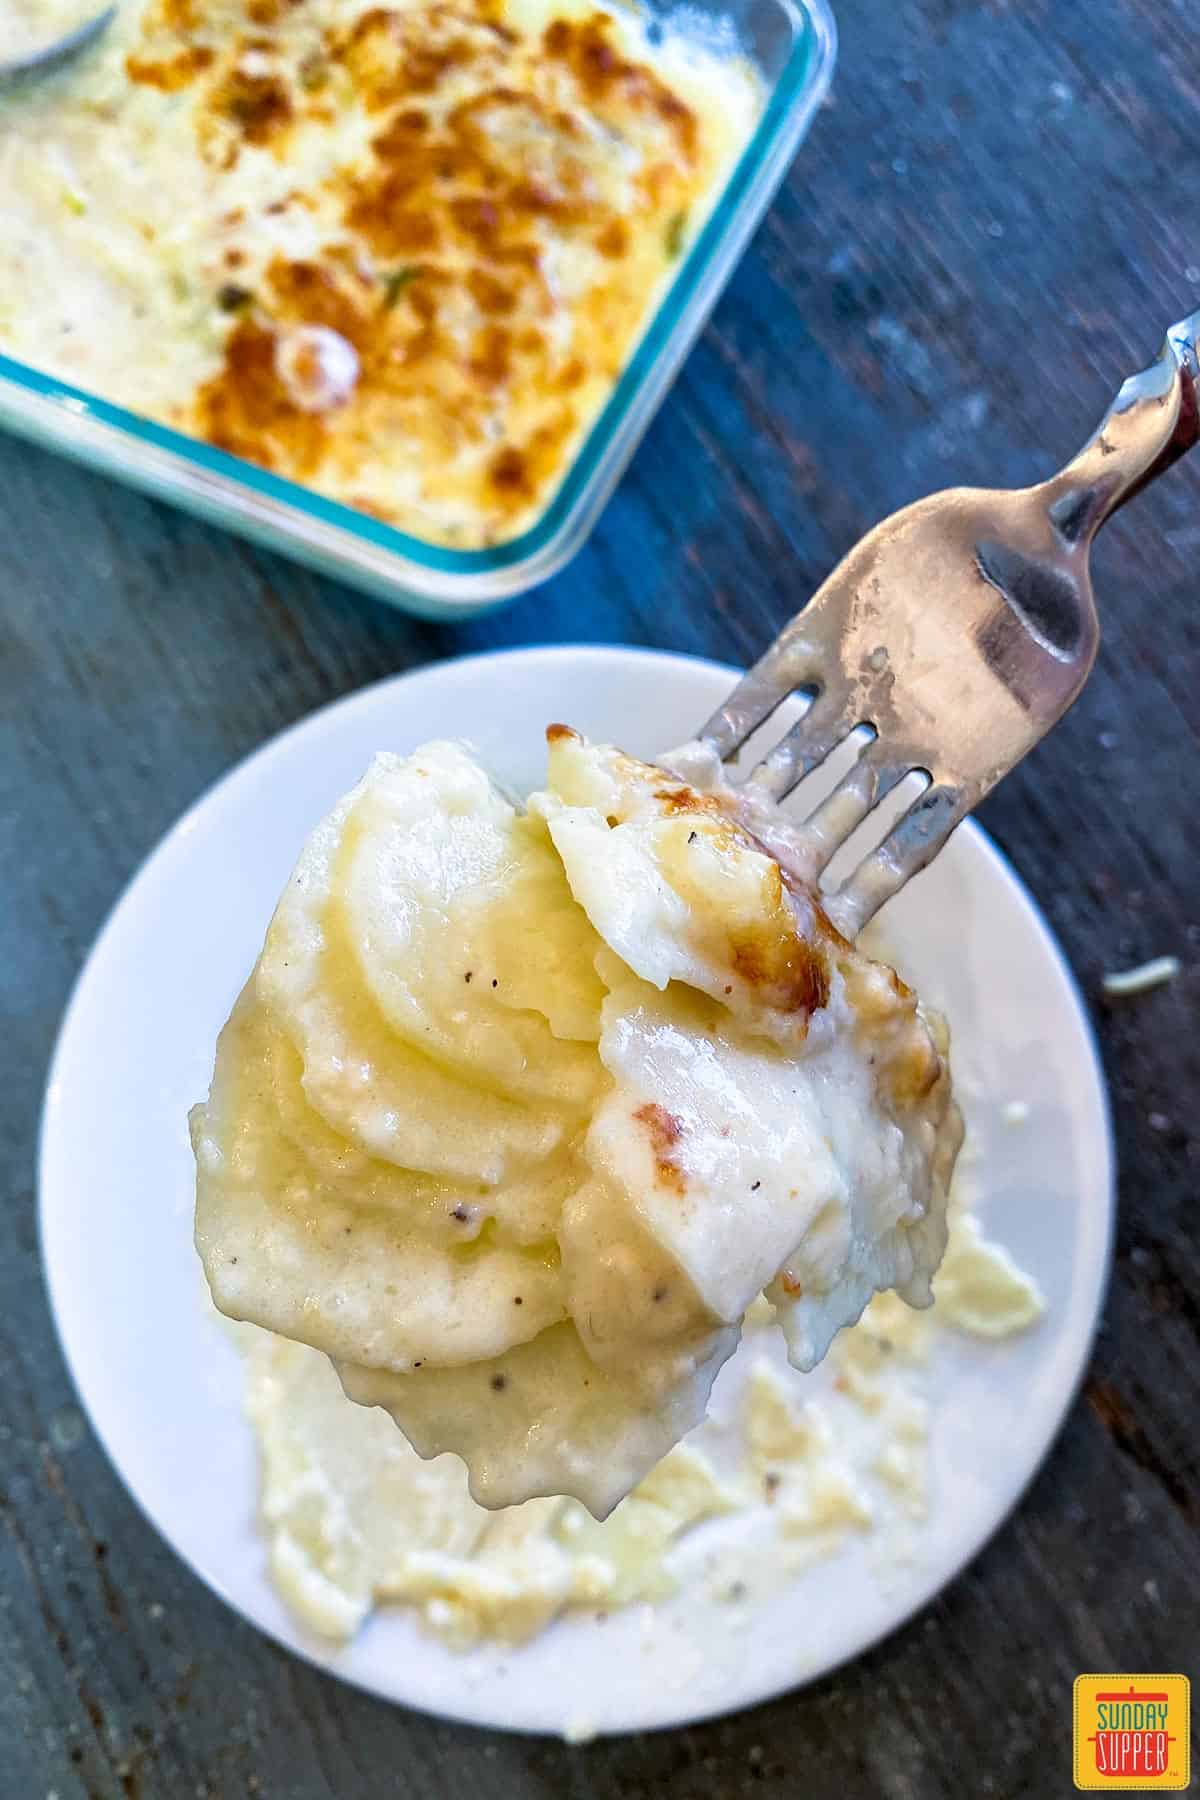 How to use a mandoline: Holding a forkful of scalloped potatoes over a white plate near the casserole dish of potatoes